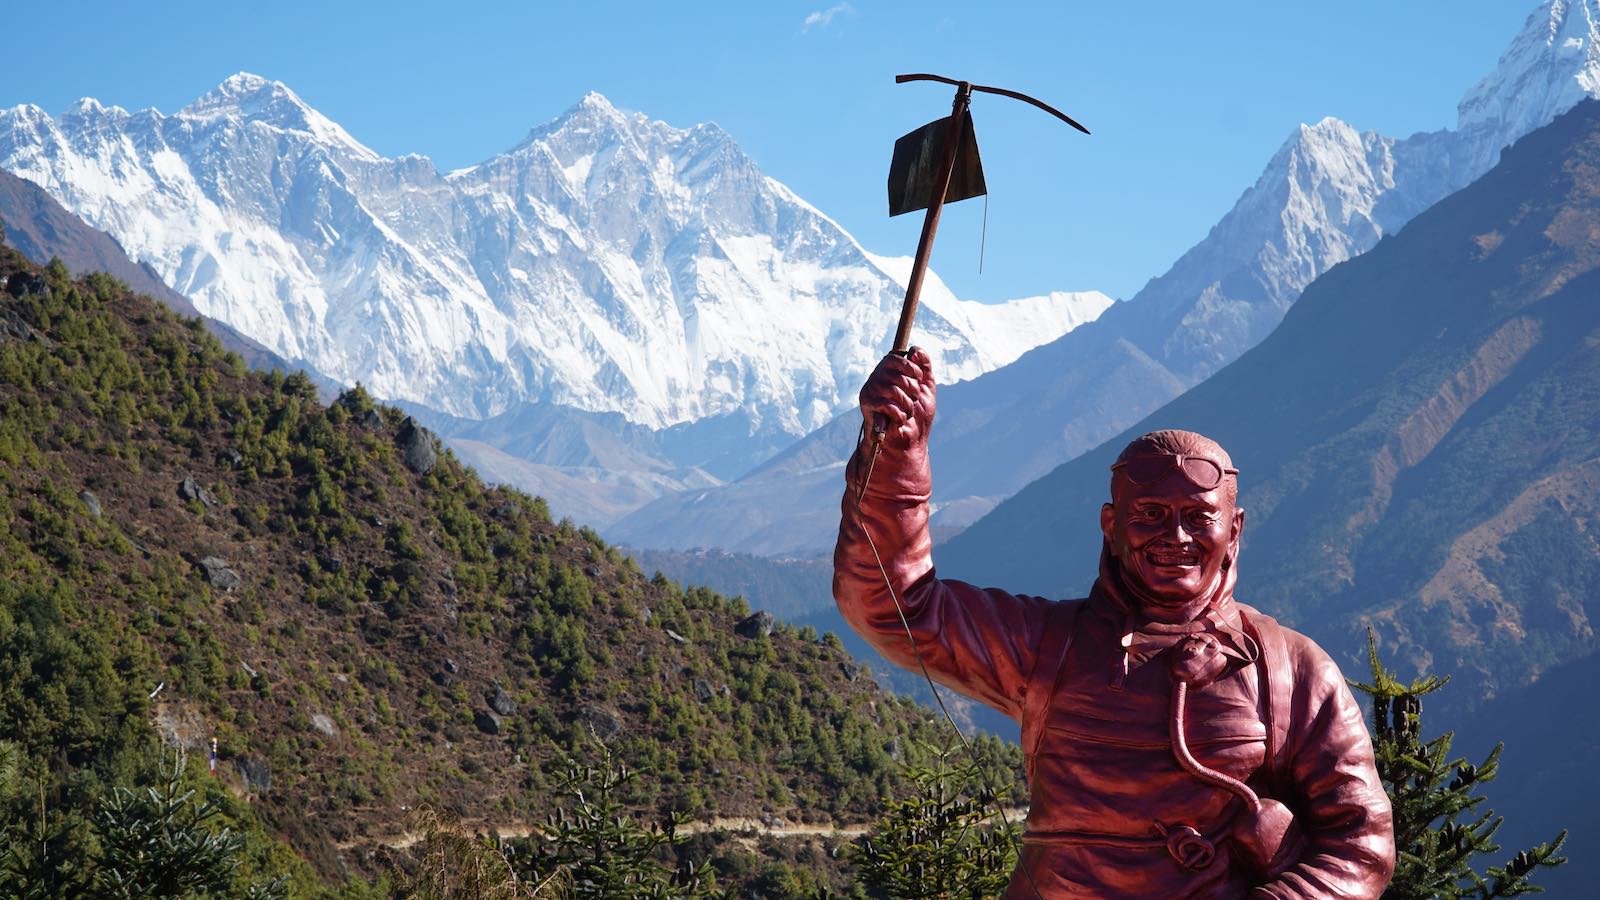 Did a quick hike in the morning to a viewpoint above Namche with a statue of Tenzing Norgay Sherpa, where I got my first good look at Everest (leftmost peak) and Lhotse (center left peak)